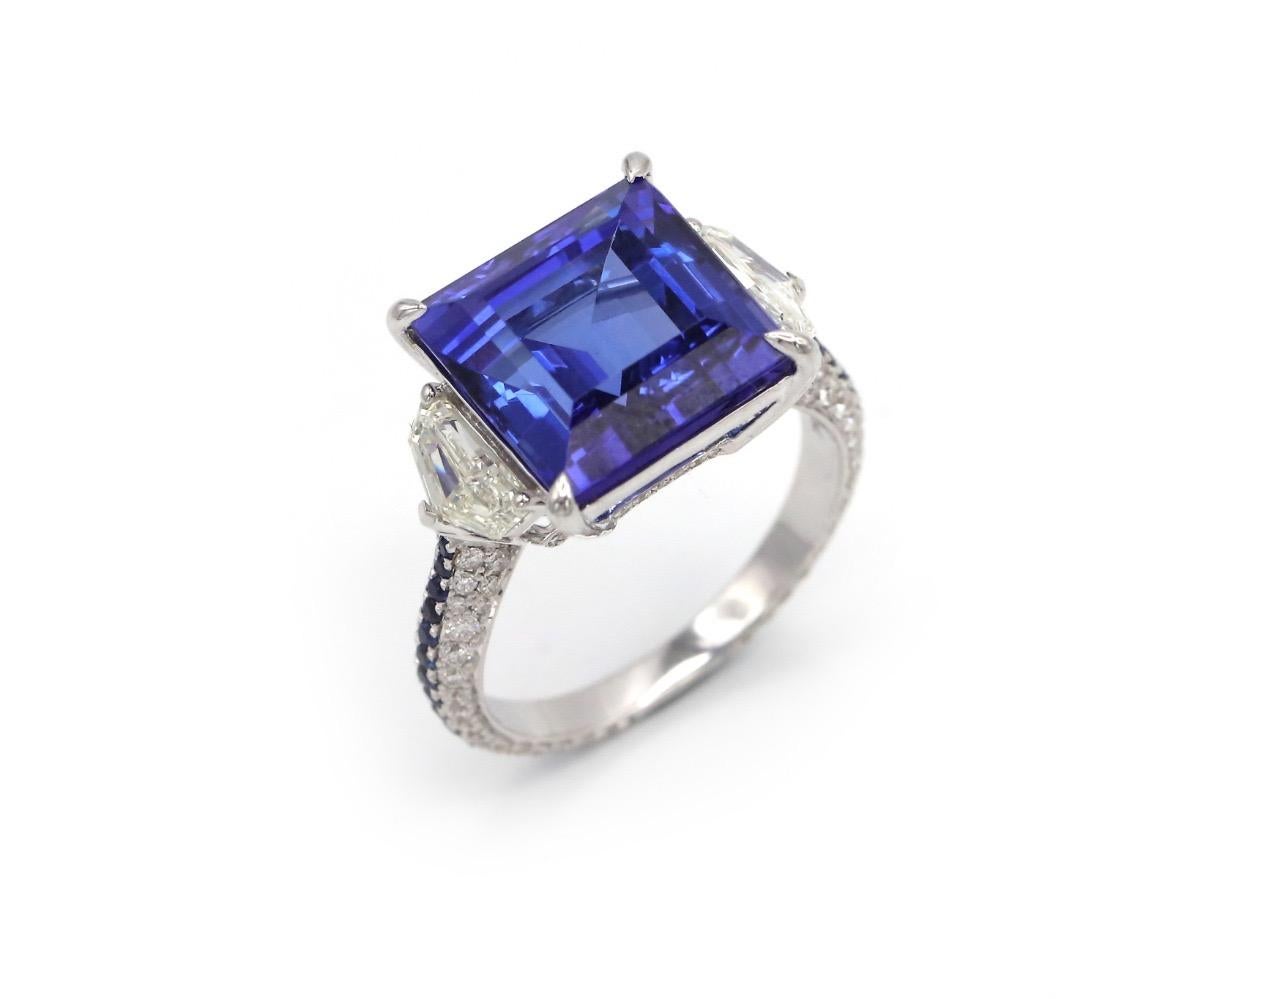 Size: 55
RD: 98
BS: 1
BS (small): 34
18 K White Gold: 2.13 GMS

Tanzanite is a pleochroic gem, which means it can show different colors when viewed in different crystal directions. This makes cutting a crucial element in determining the color. This